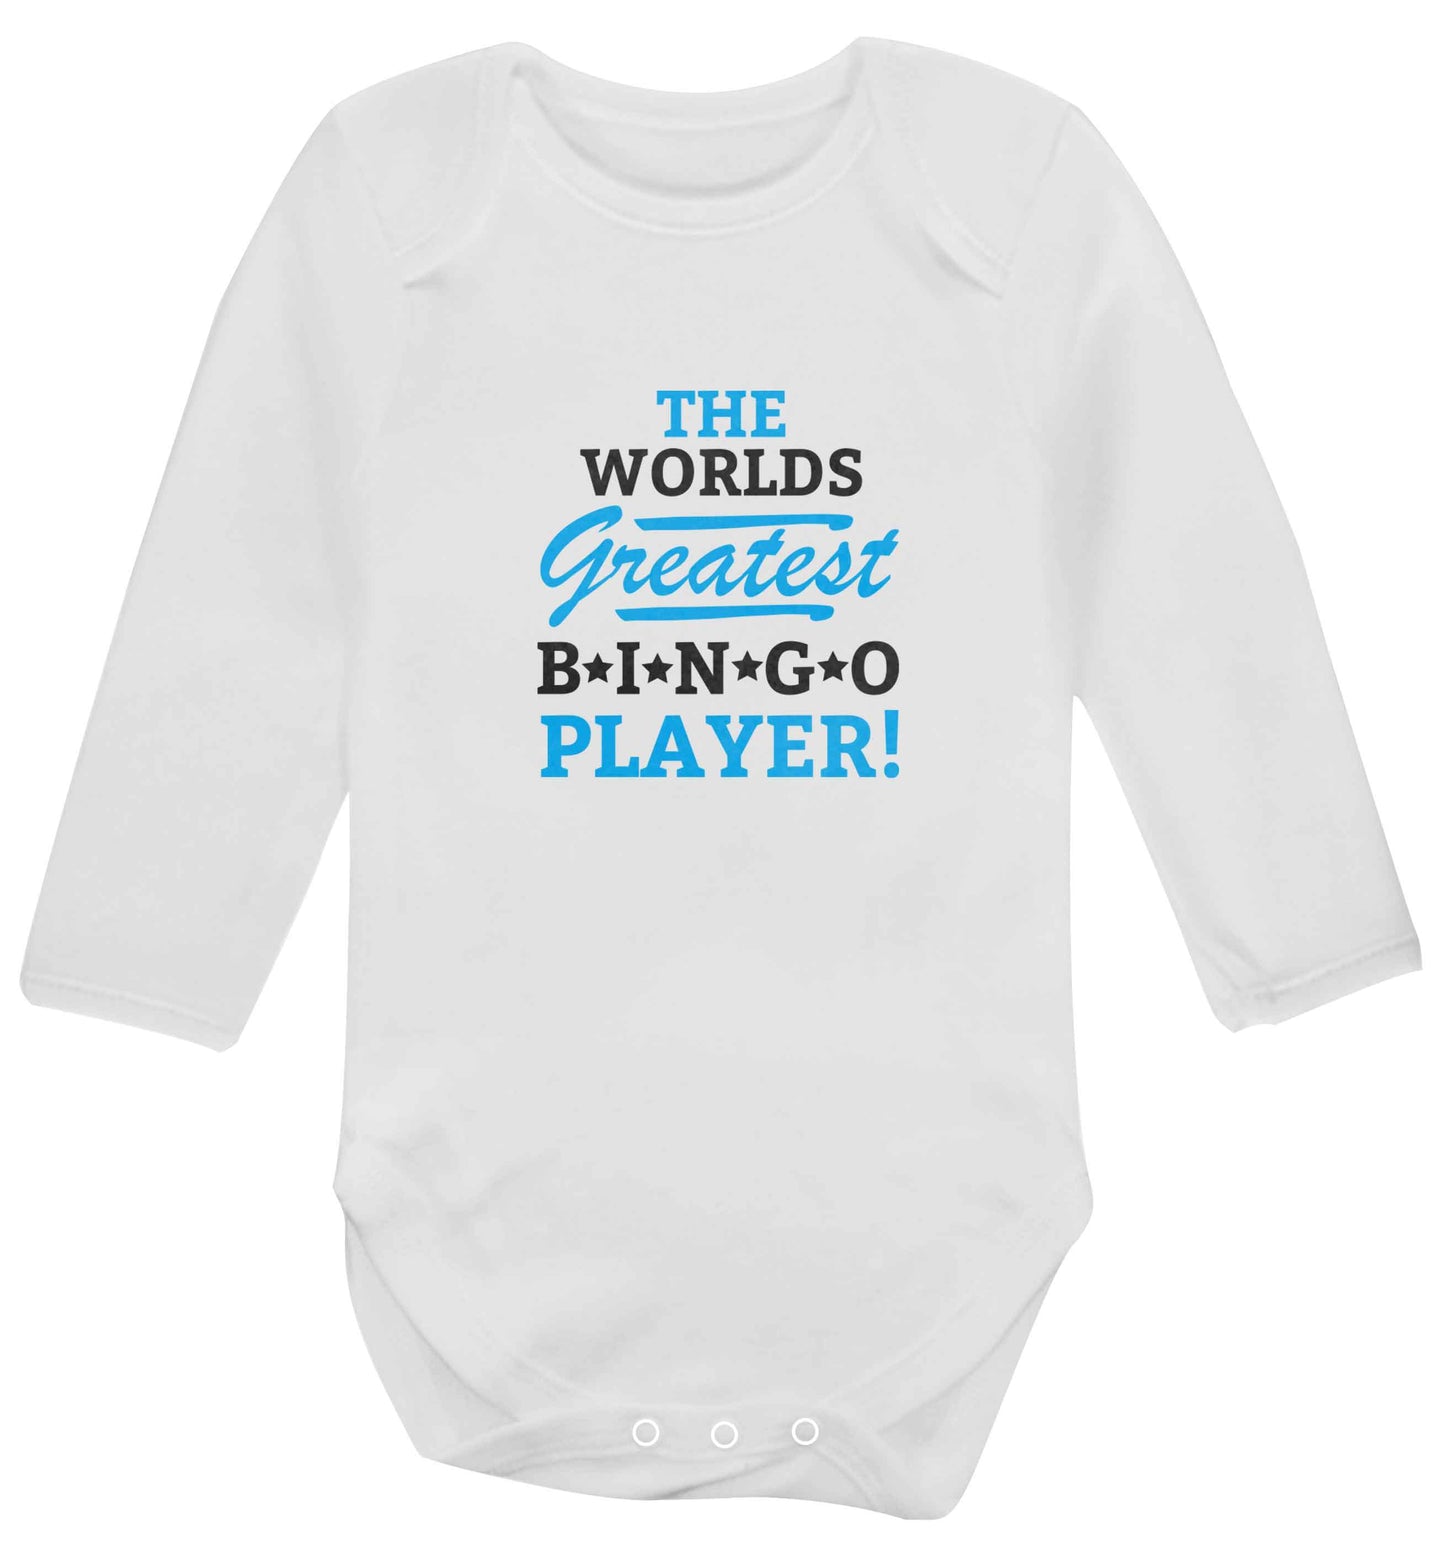 Worlds greatest bingo player baby vest long sleeved white 6-12 months